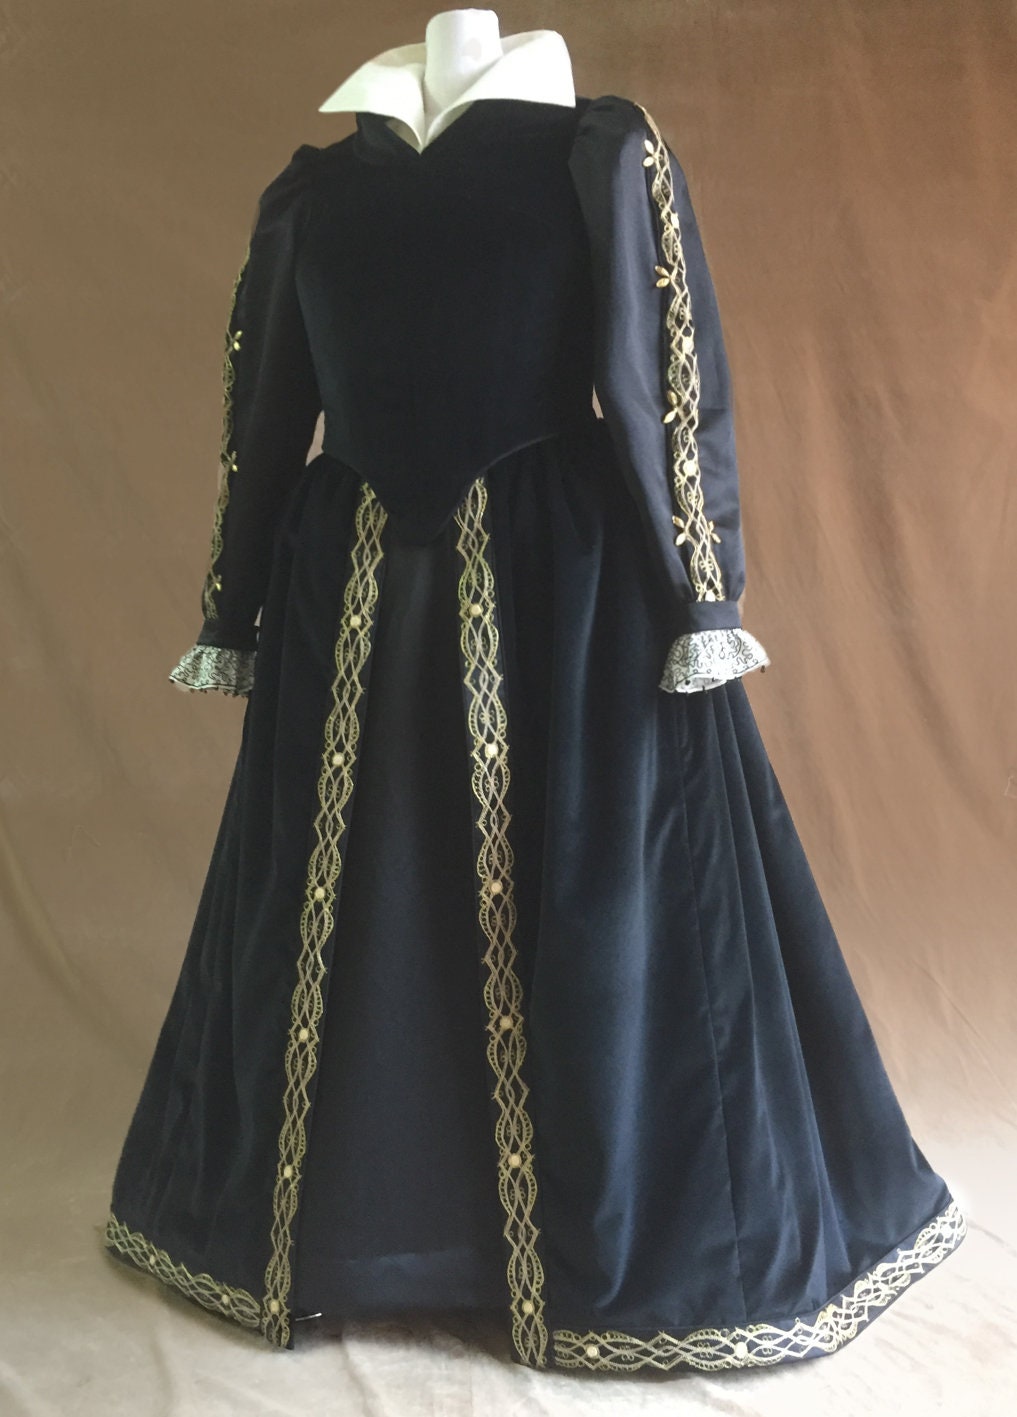 Black and Gold Trim or Braid - Costumes, Medieval Trim – The Sewing Hutch